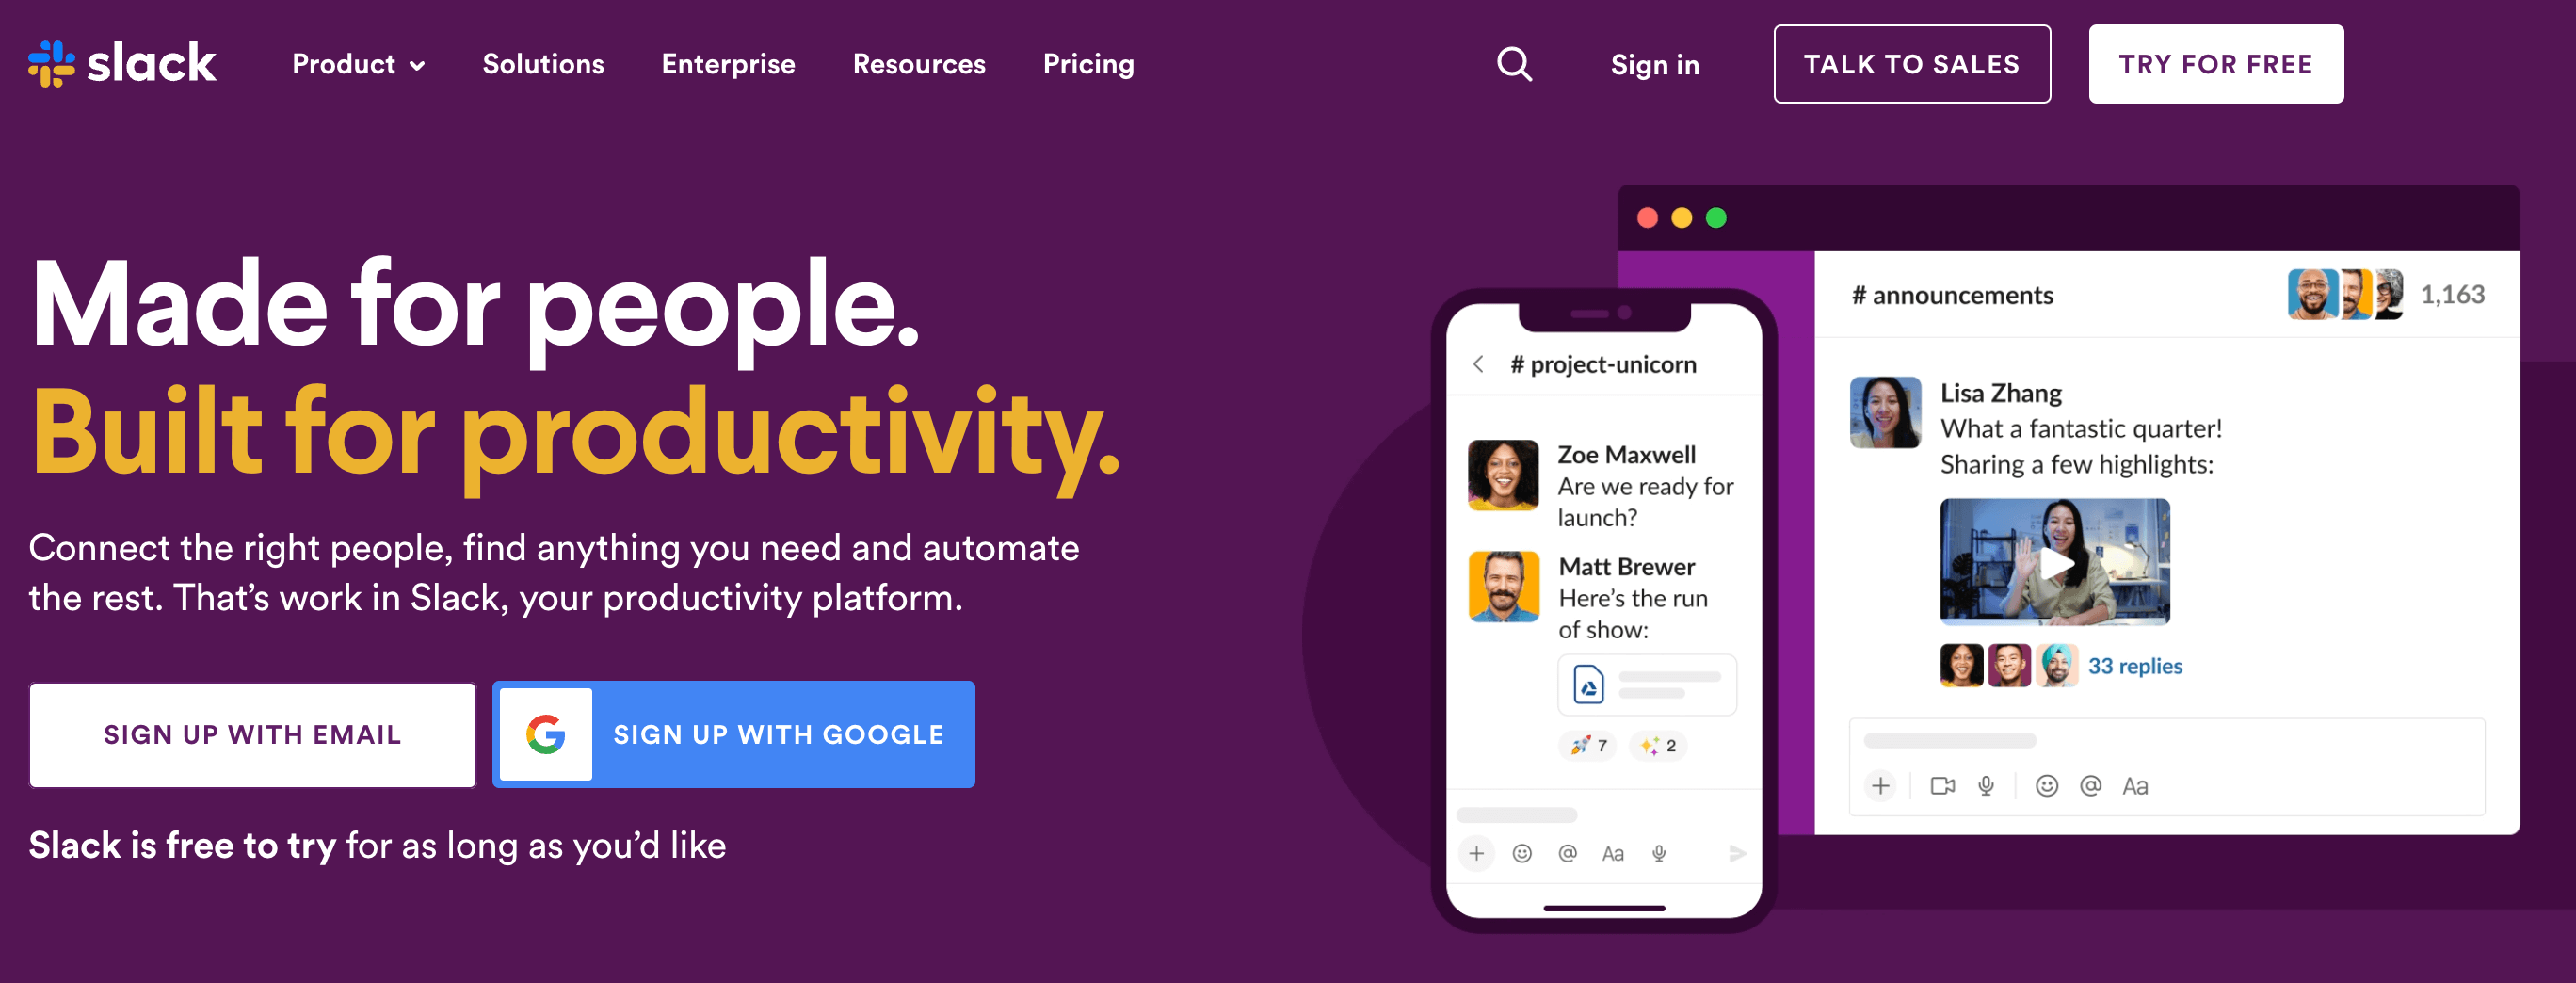 Slack magenta homepage with "Made for people. Built for productivity" headline and CTAs.